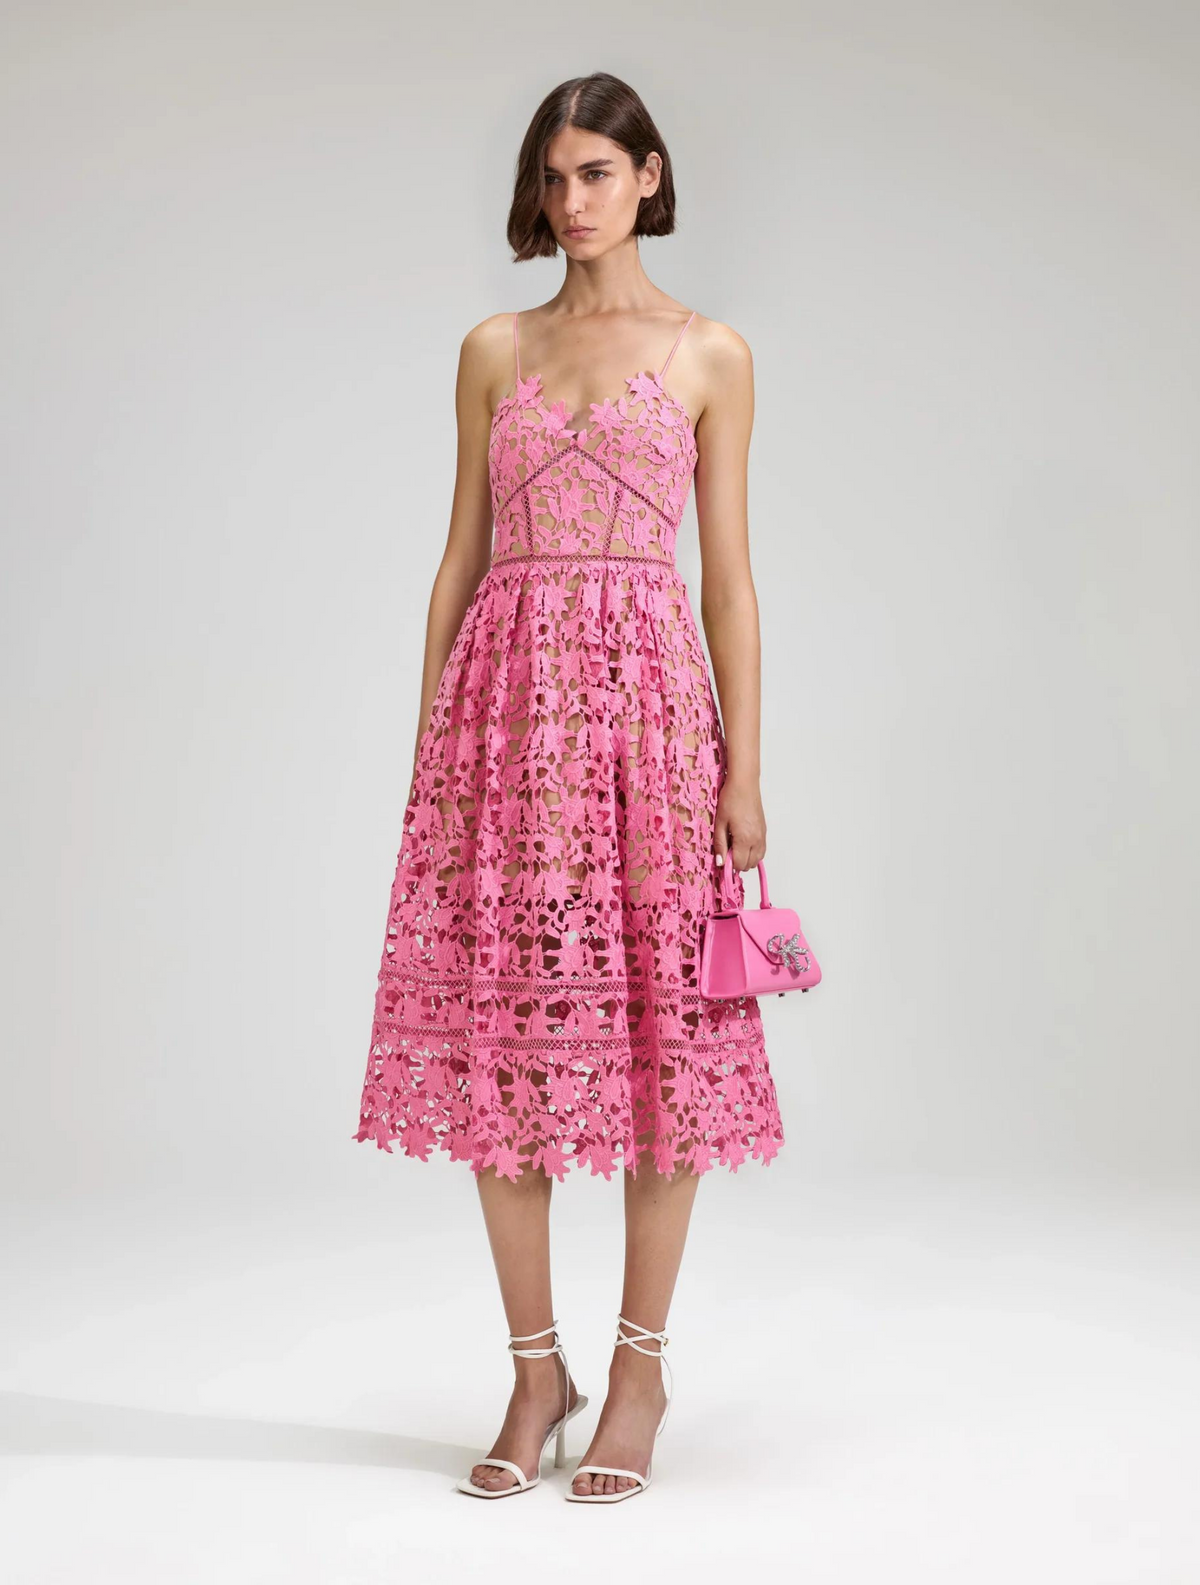 pink lace 3d dress with spaghetti straps